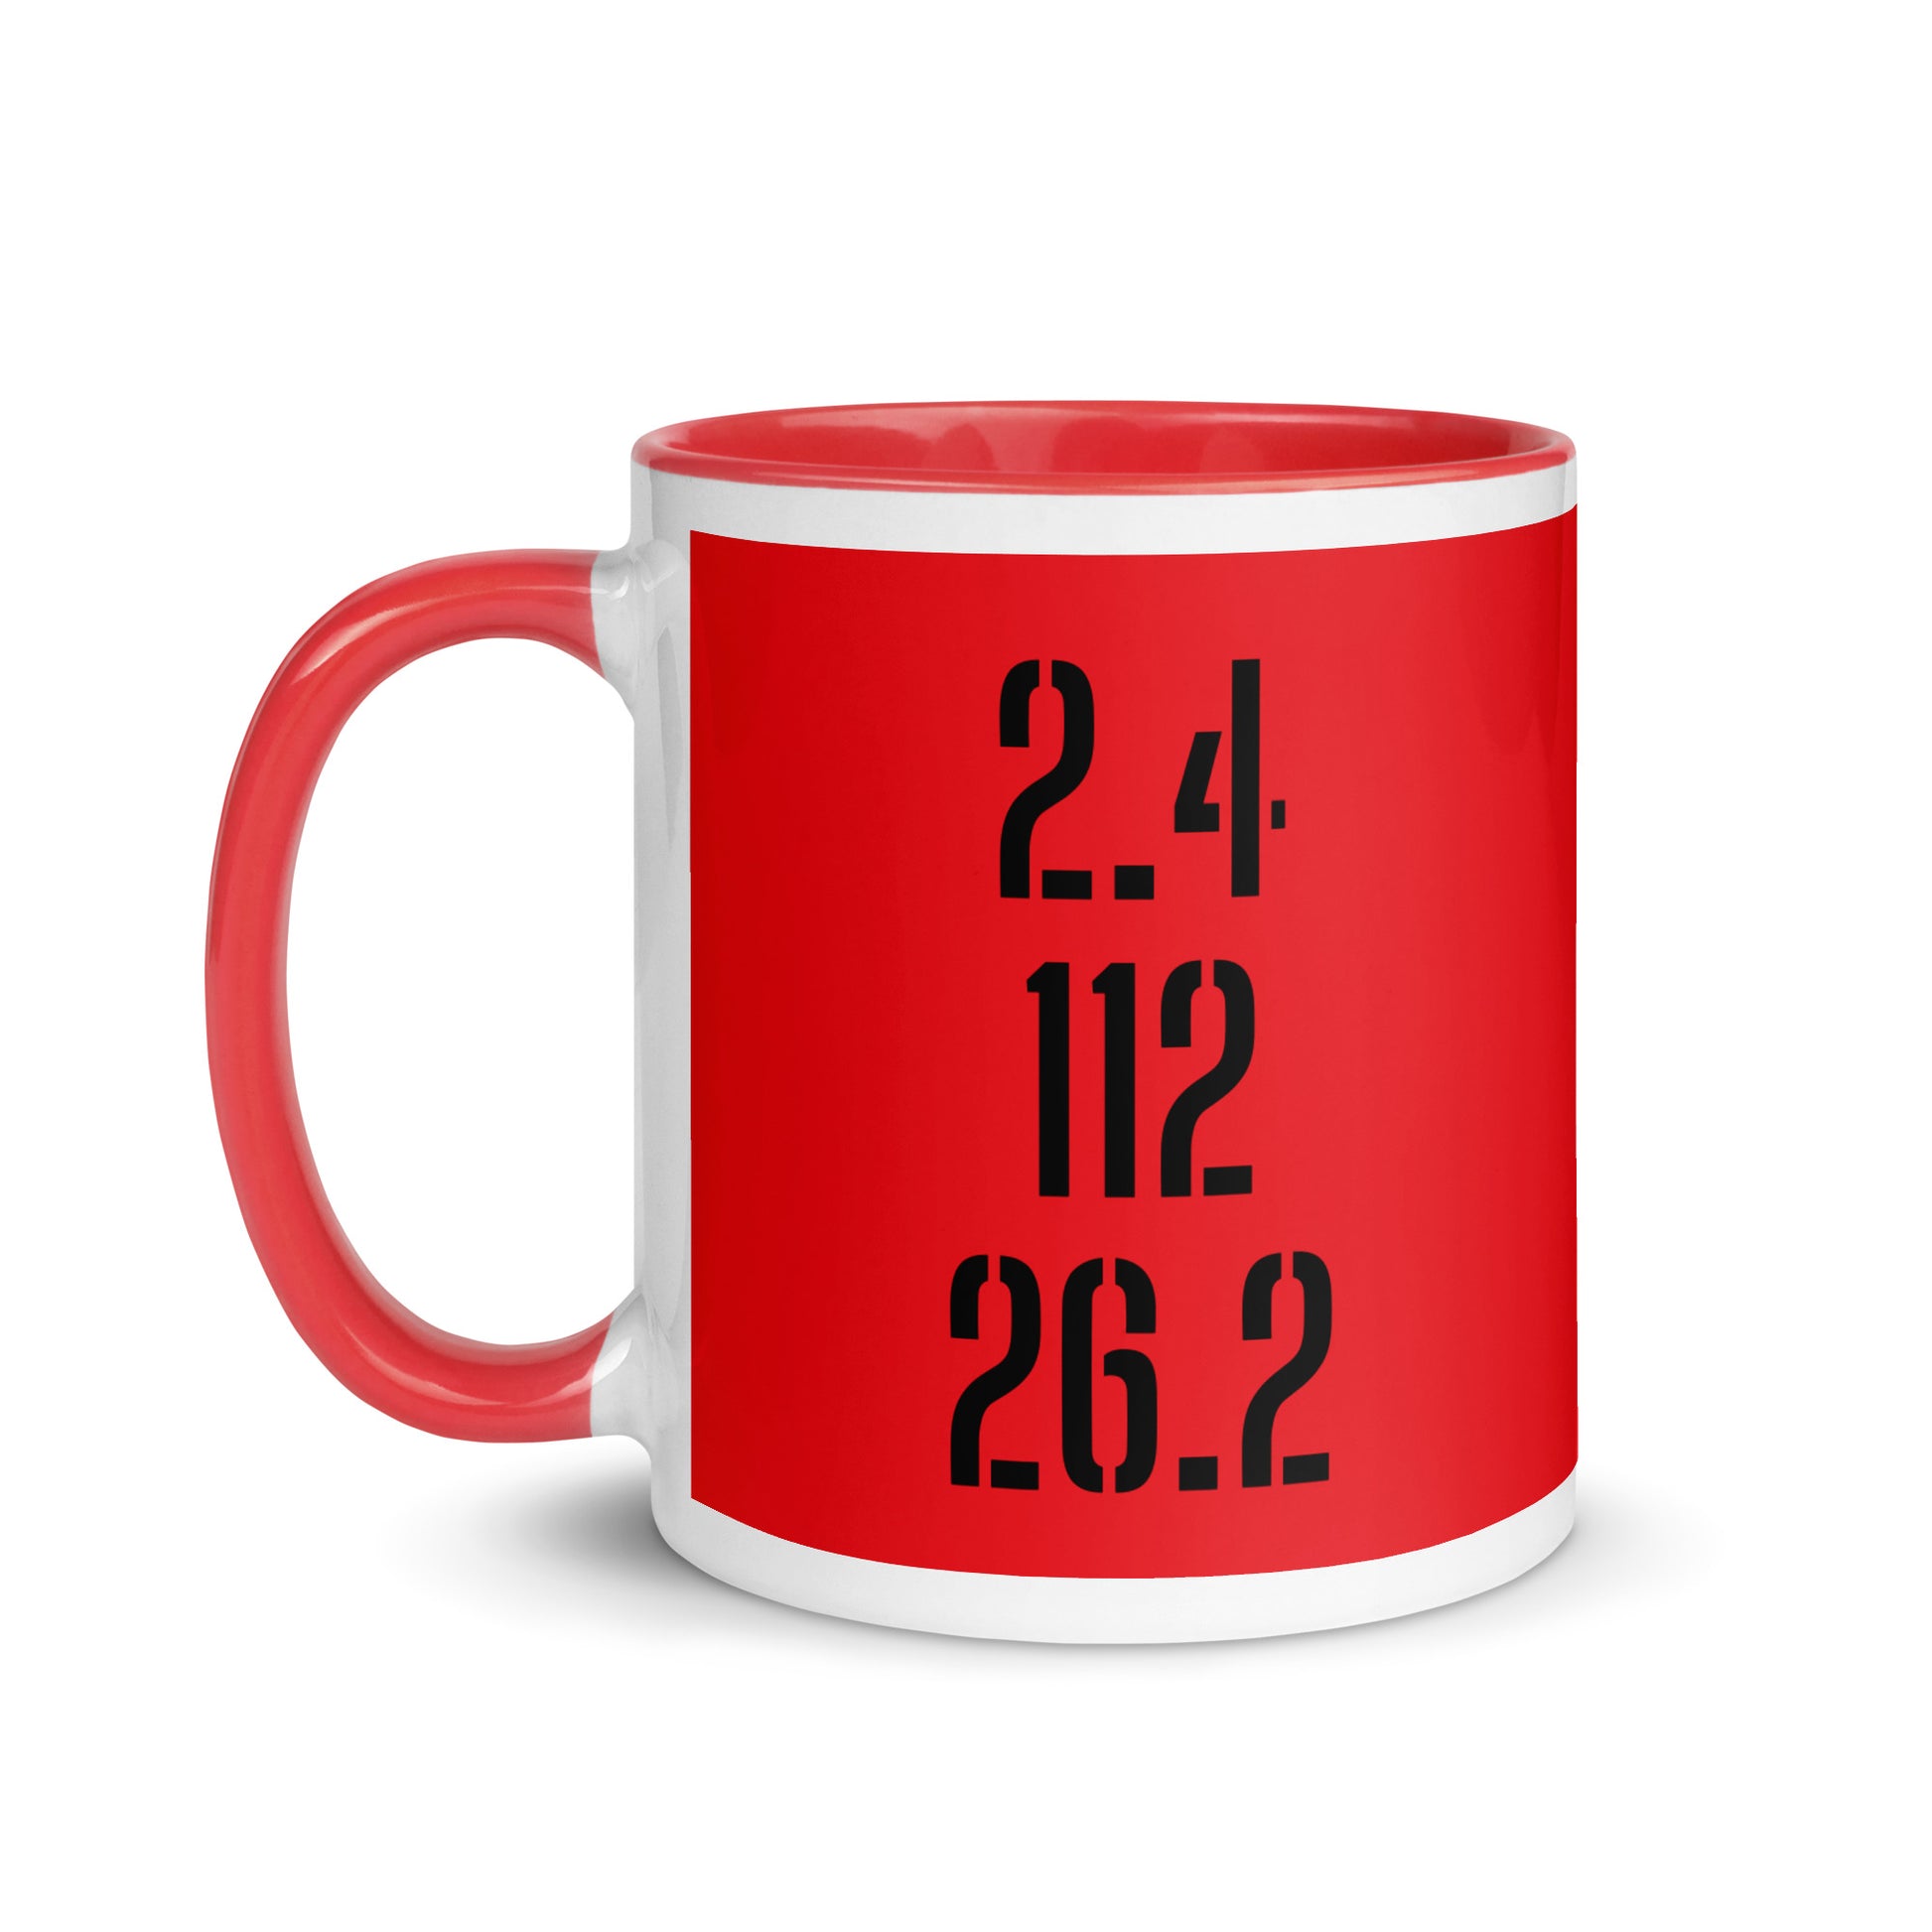 red and white mug with 2.4, 112 and 26.2 iron man distances in a black font